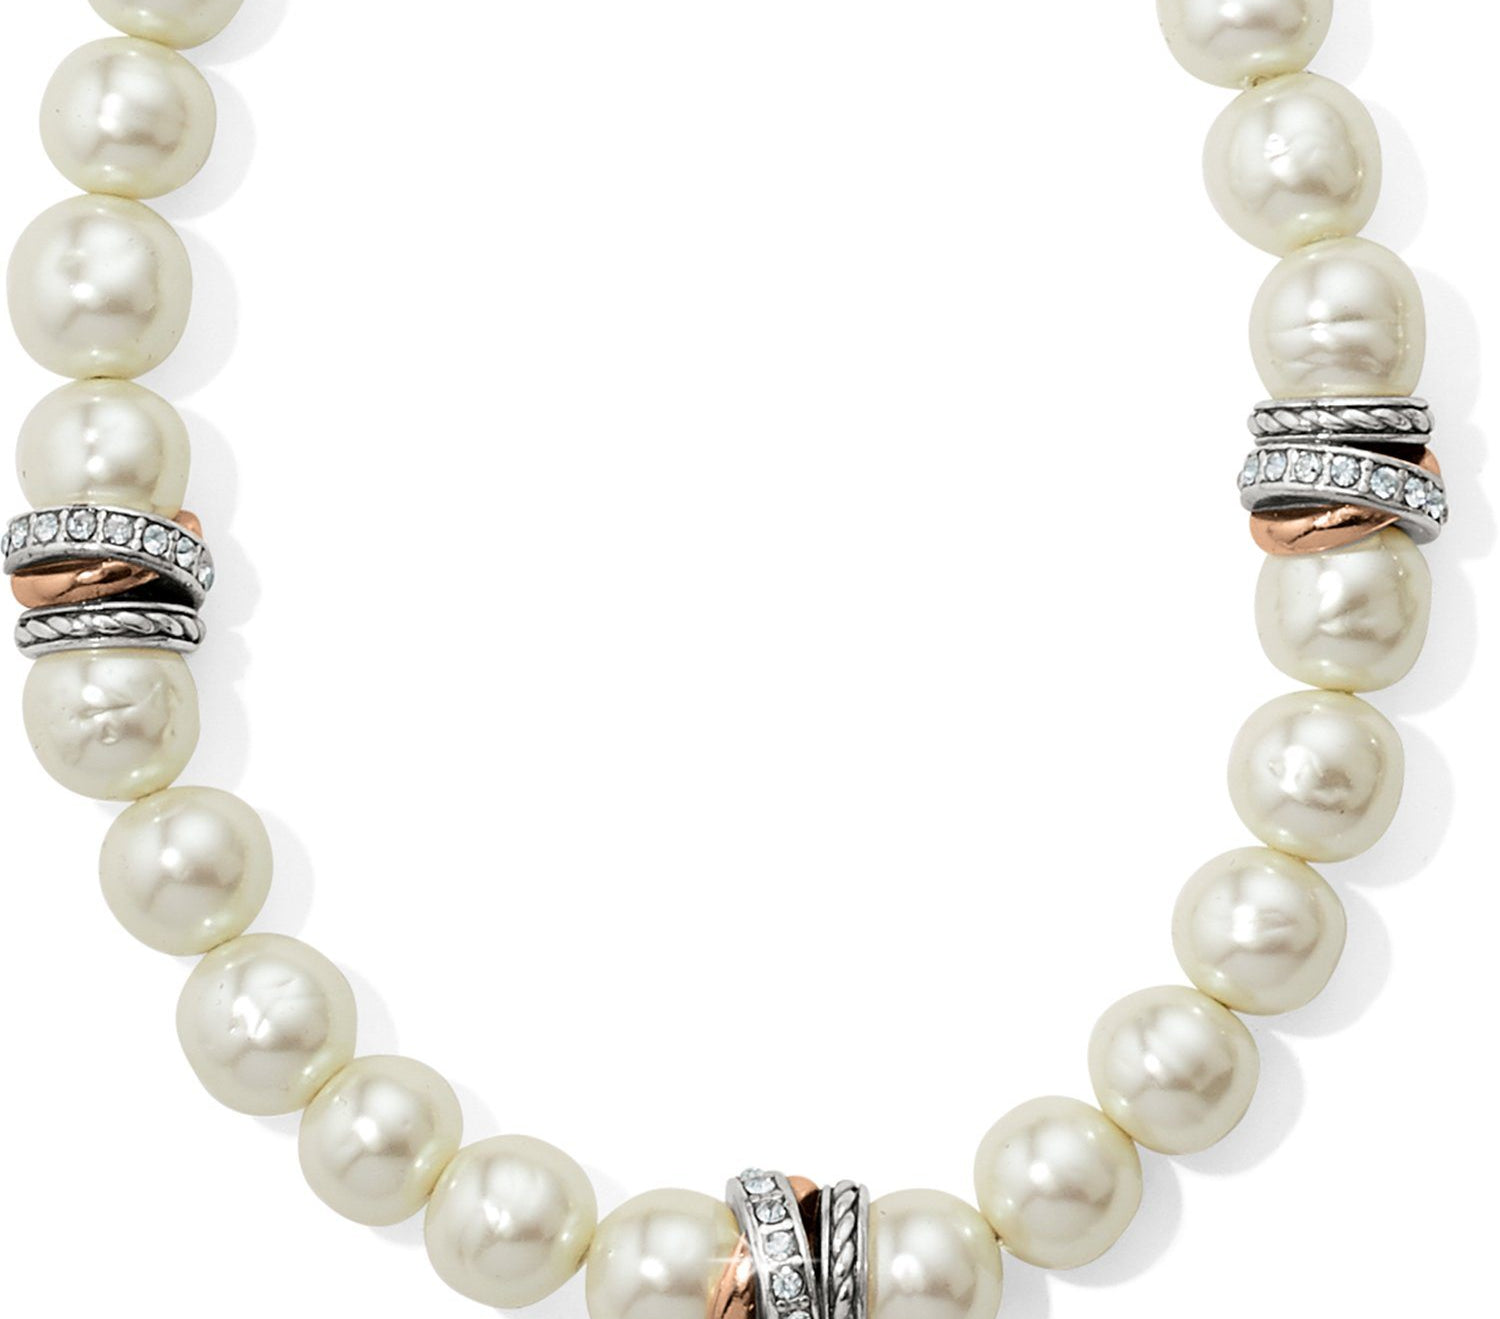 Neptune's Rings Pearl Short Necklace Necklaces Brighton 